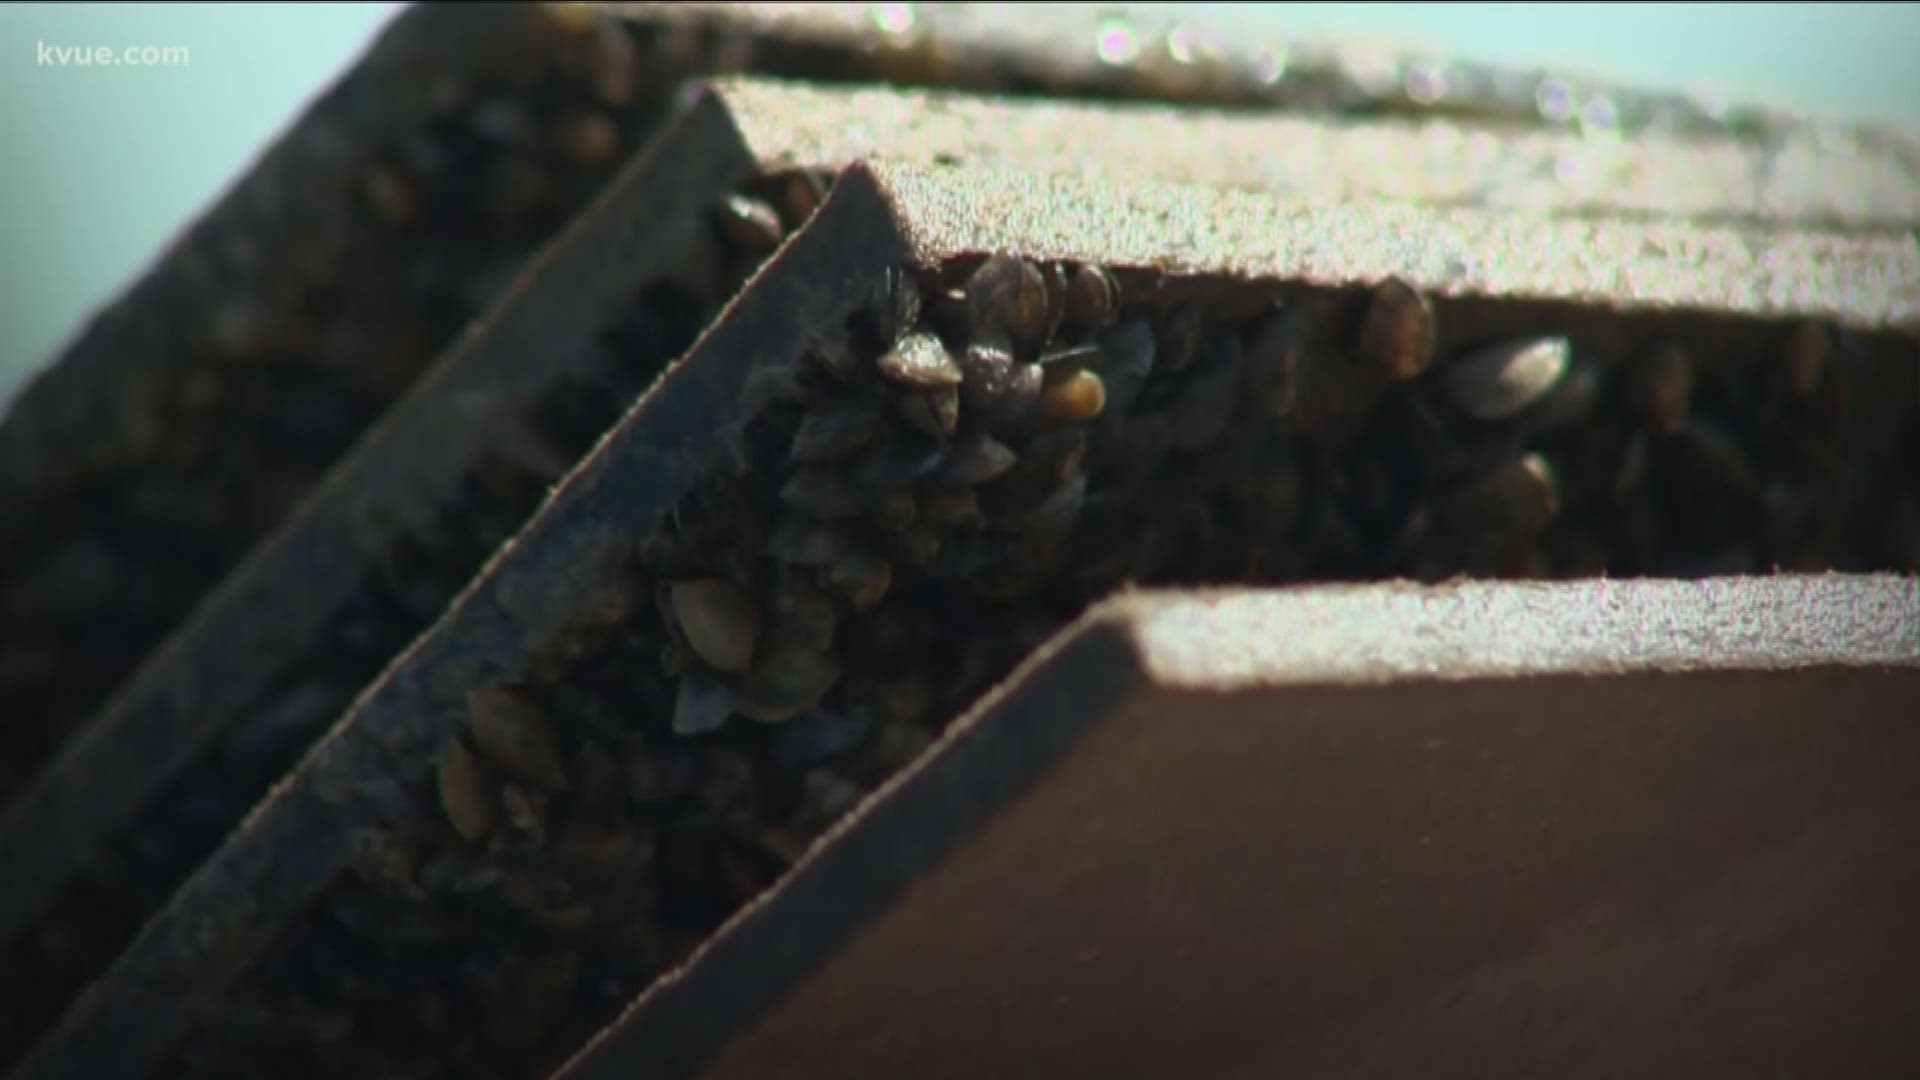 Zebra mussels were found to be the reason for a recent stench found by some Austin residents in their drinking water.